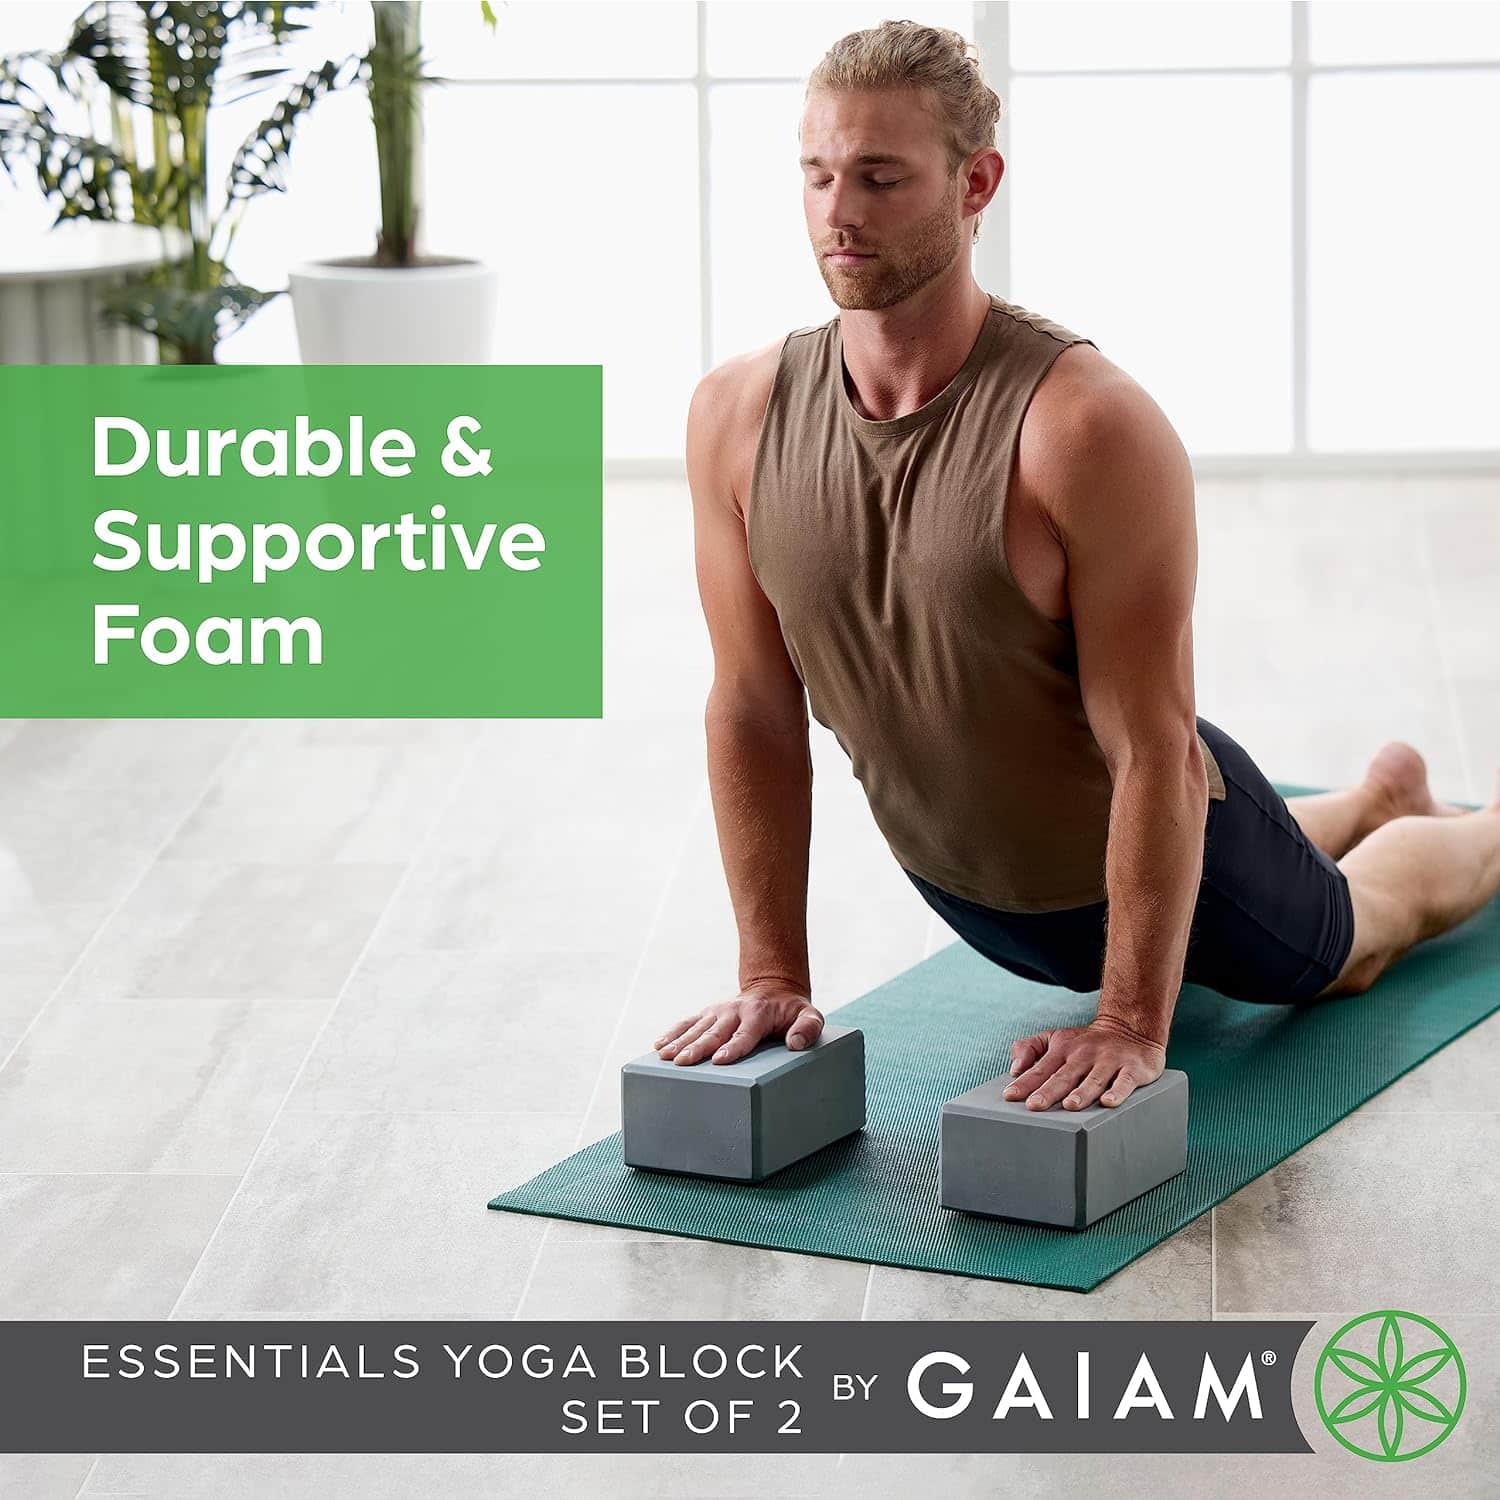 Gaiam Essentials Yoga Block (Set Of 2) - The Perfect Support for Your Yoga Practice